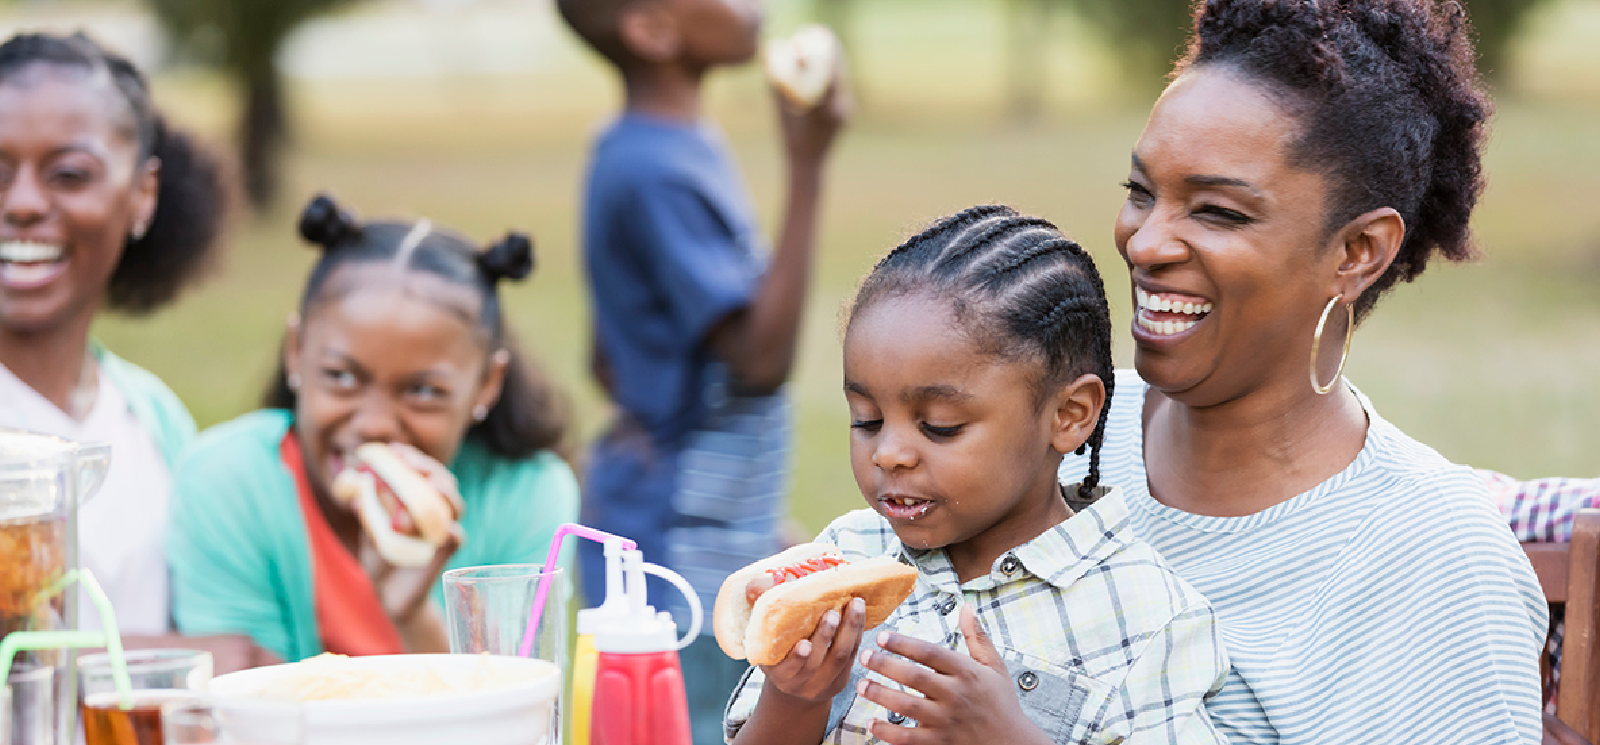 IMAGE: Family eating hot dogs at a backyard BBQ